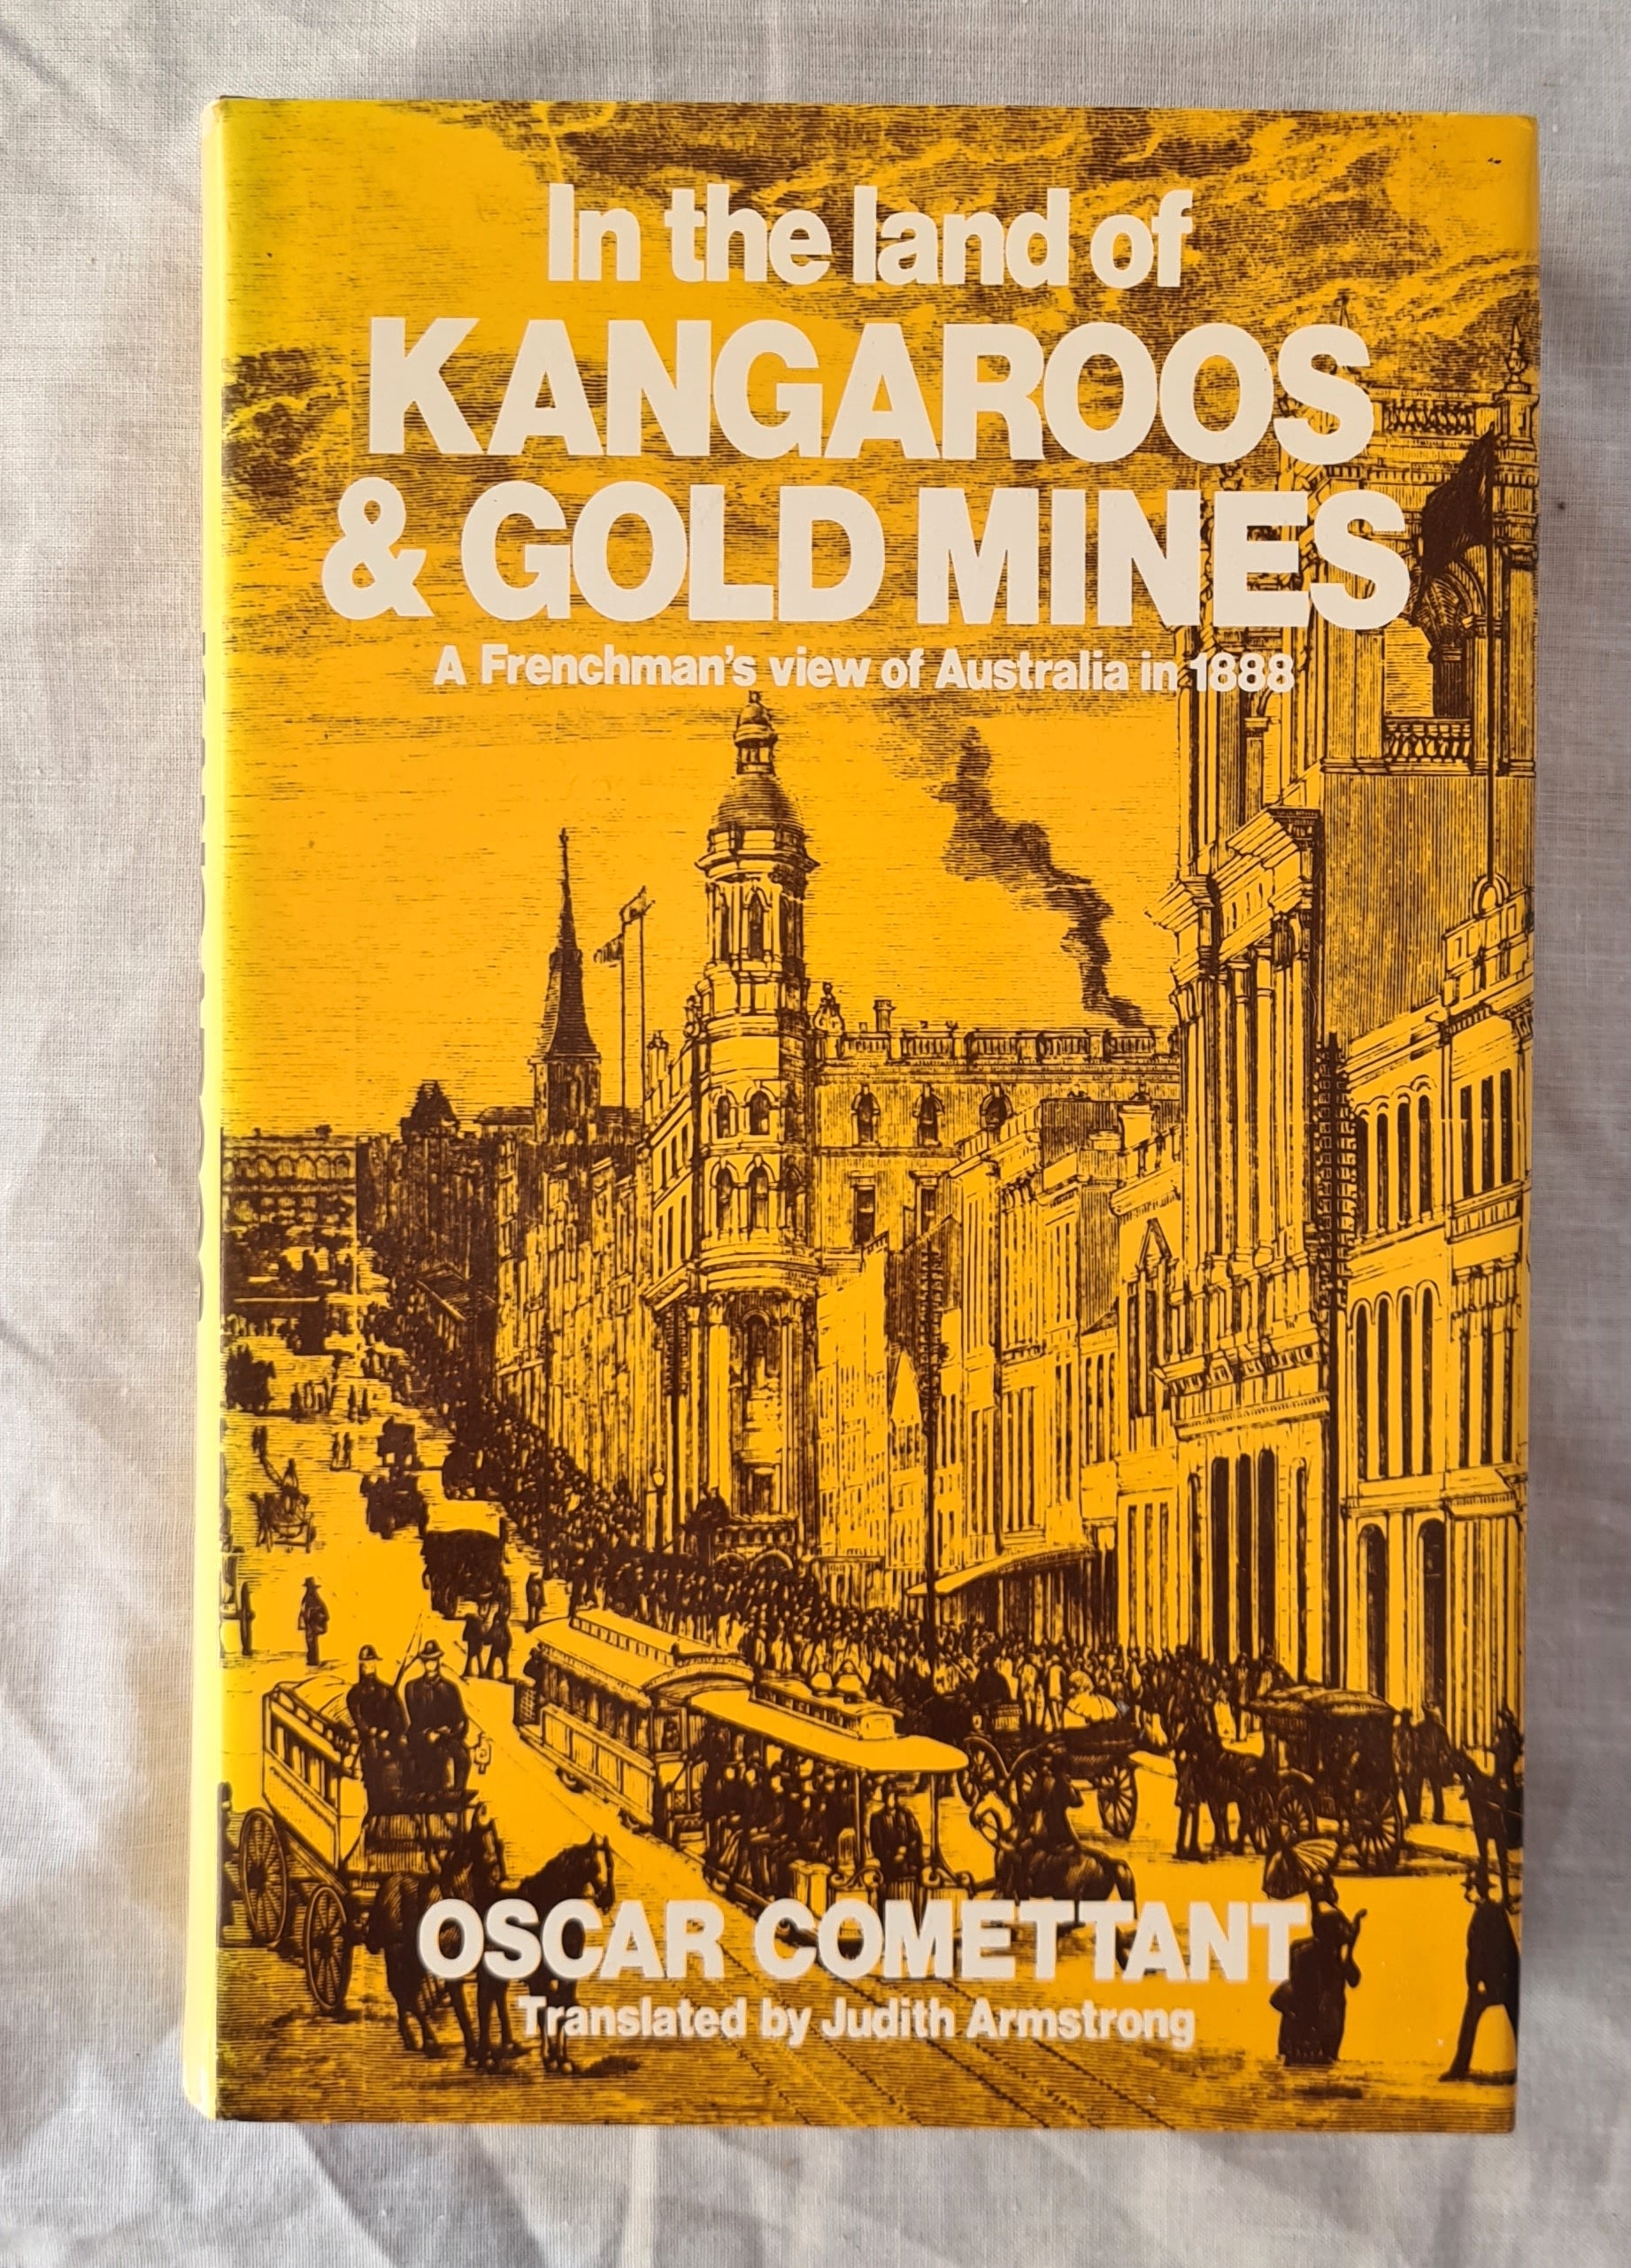 In The land of Kangaroos and Gold Mines  A Frenchman’s view of Australia in 1888  by Oscar Comettant  Translated by Judith Armstrong